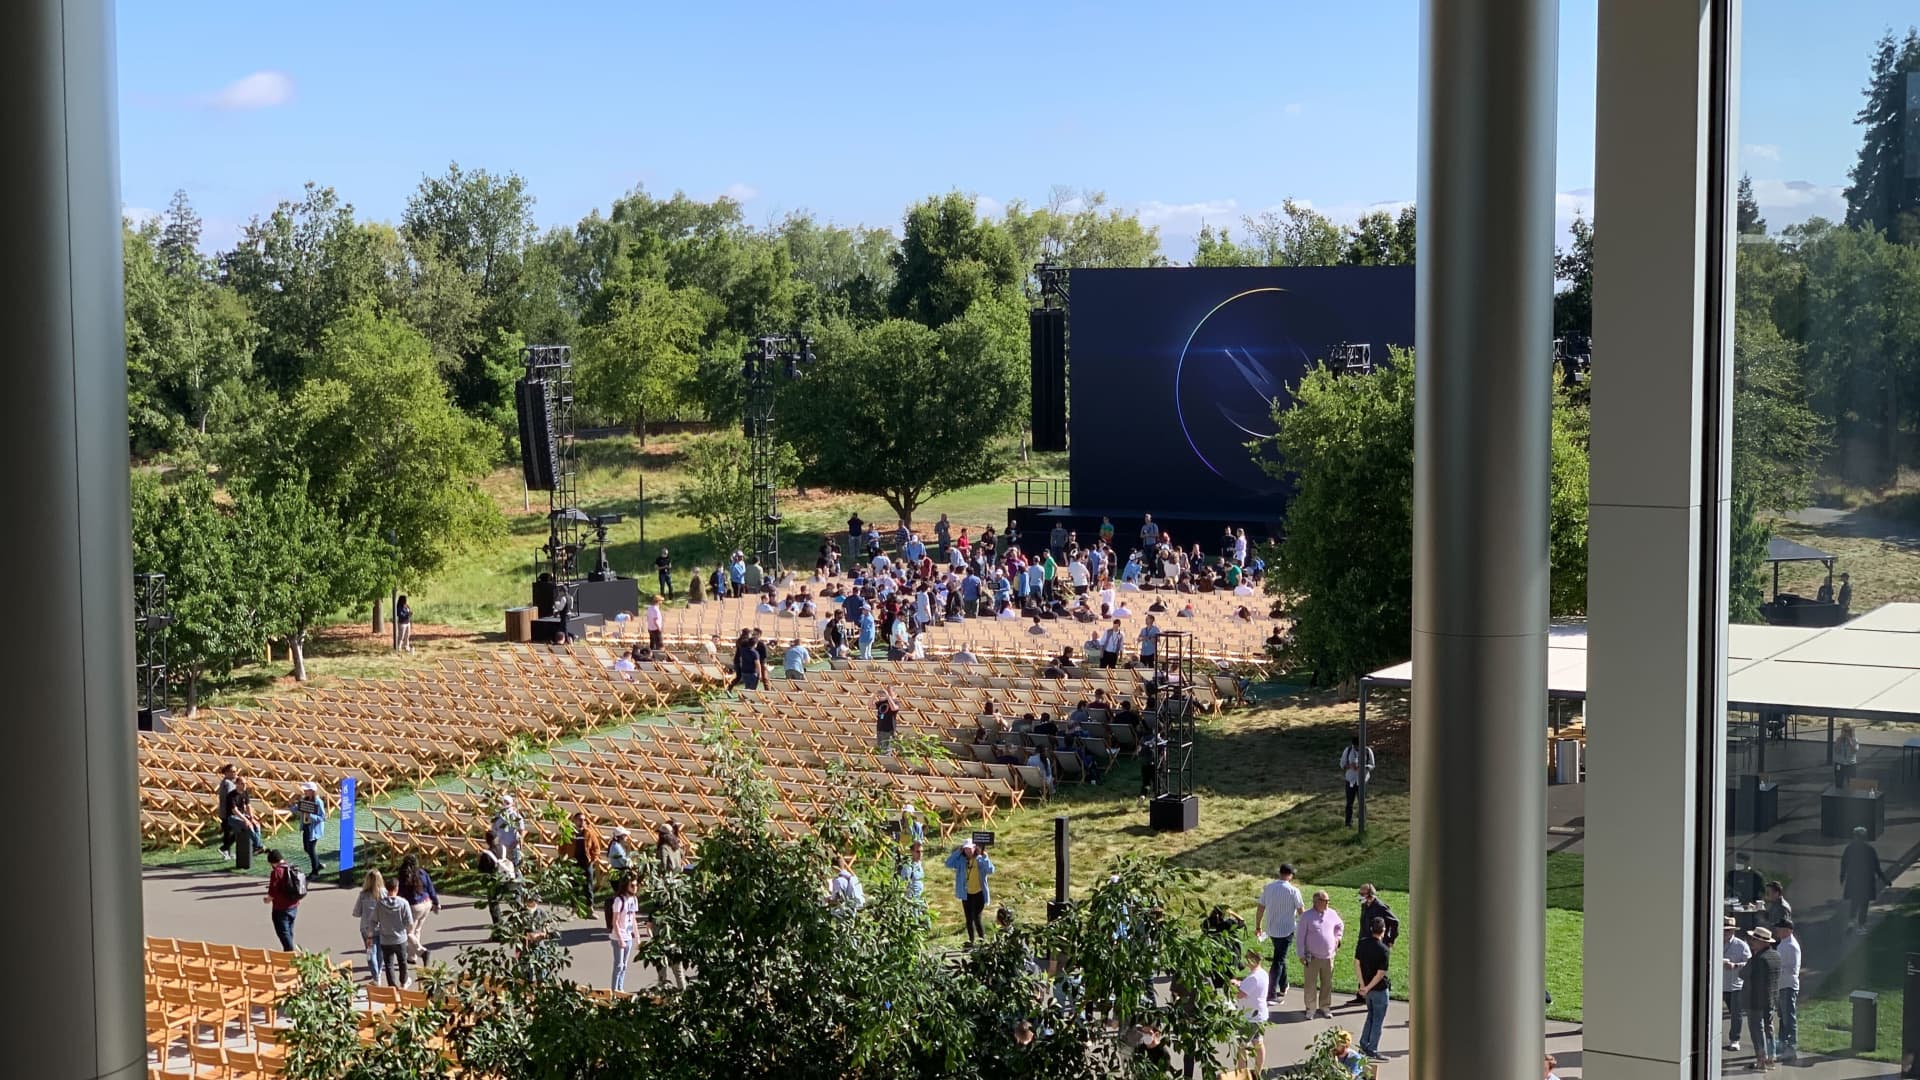 We're live from WWDC 2022